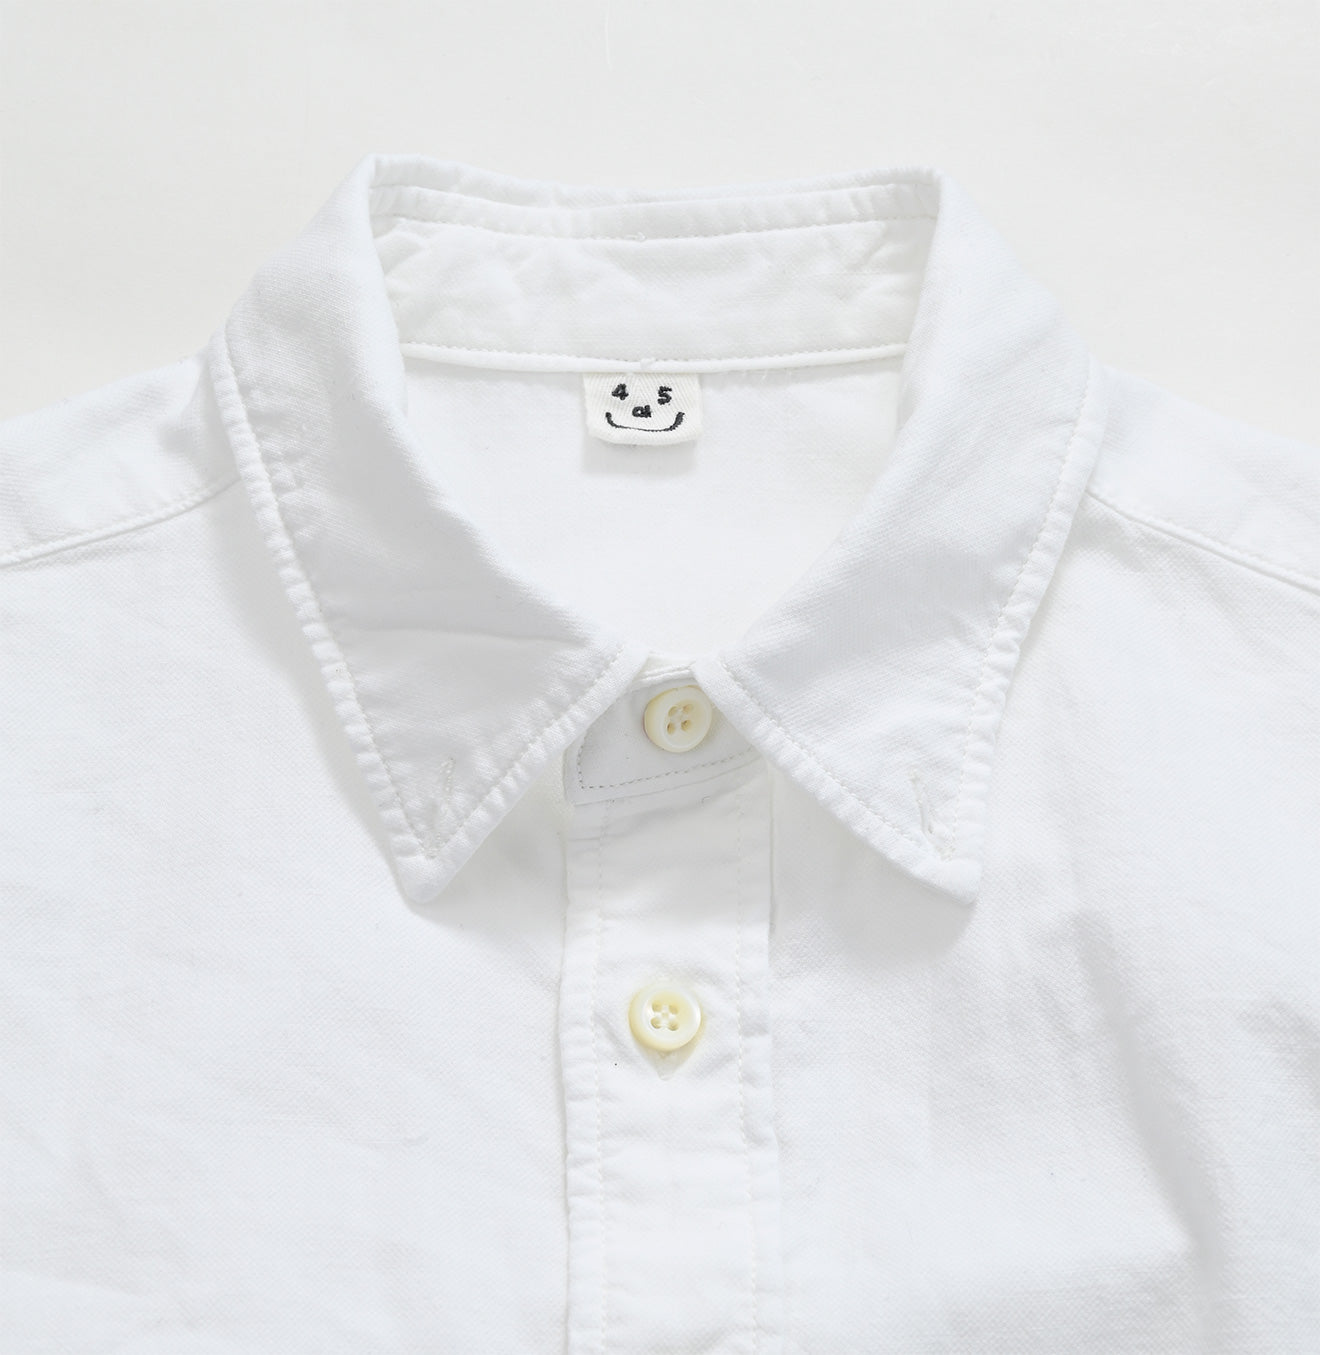 Double-woven 908 Loafer Shirt